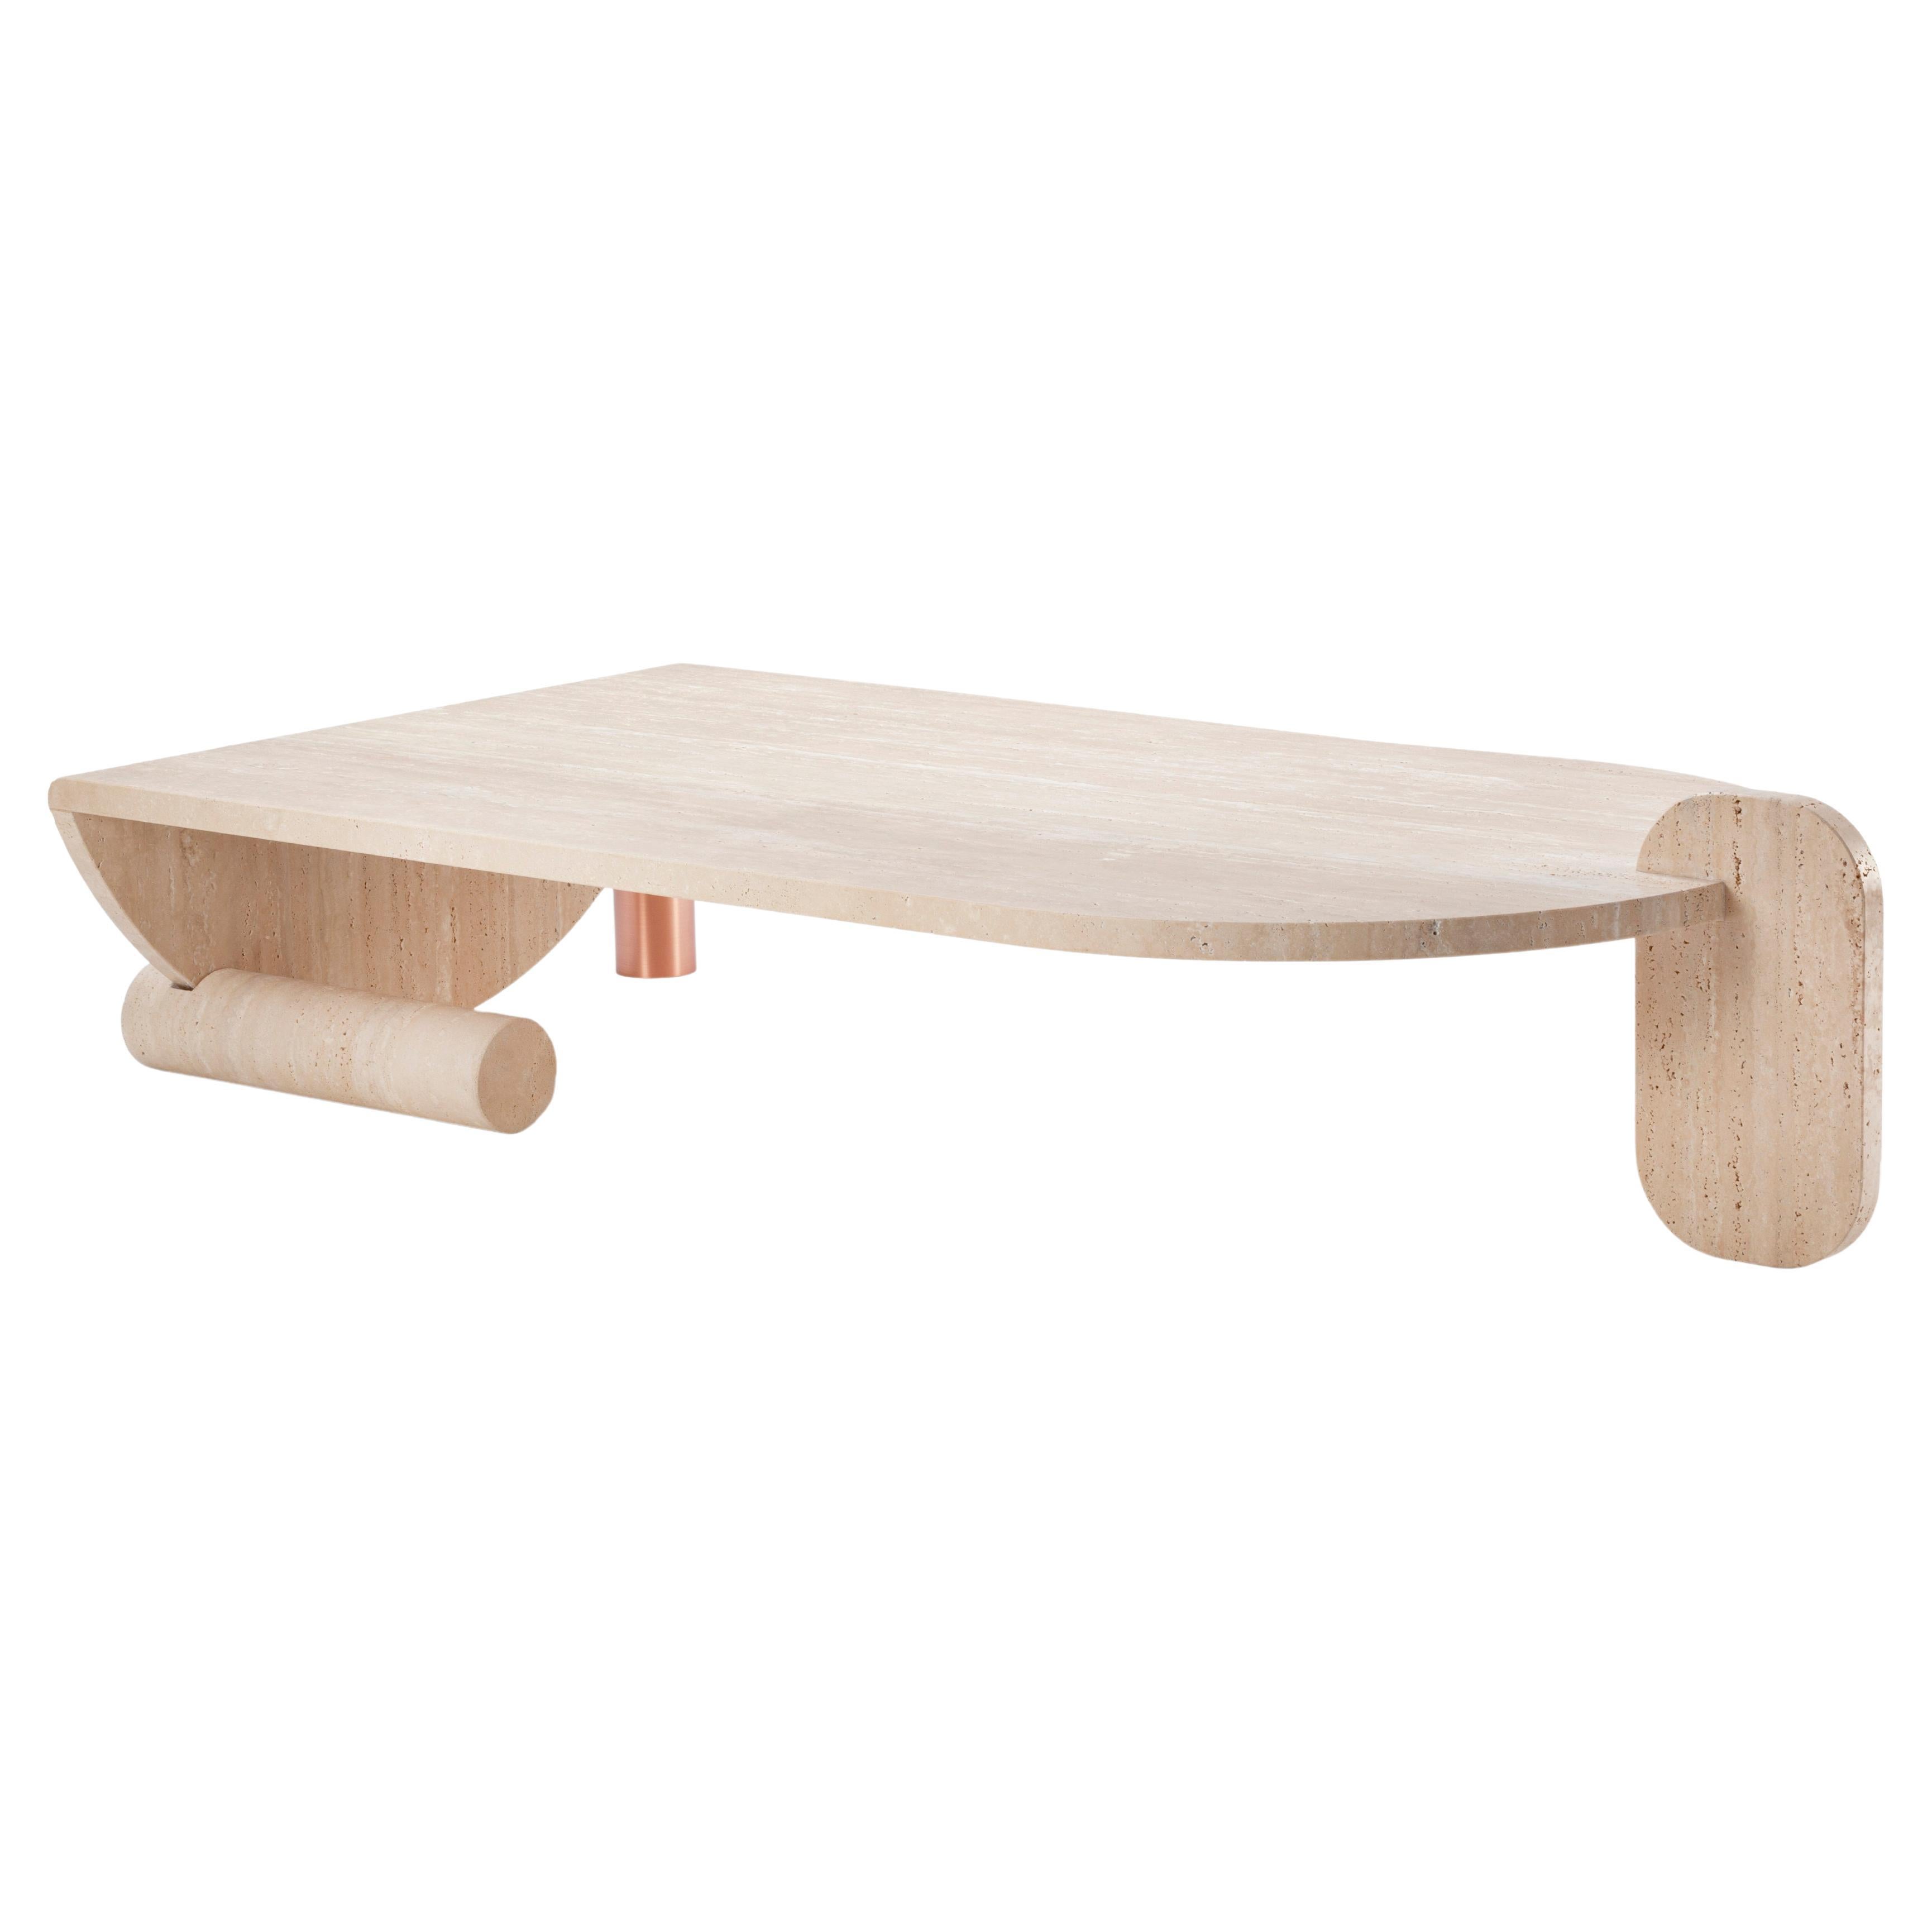 Playing Games Center Table by Dooq